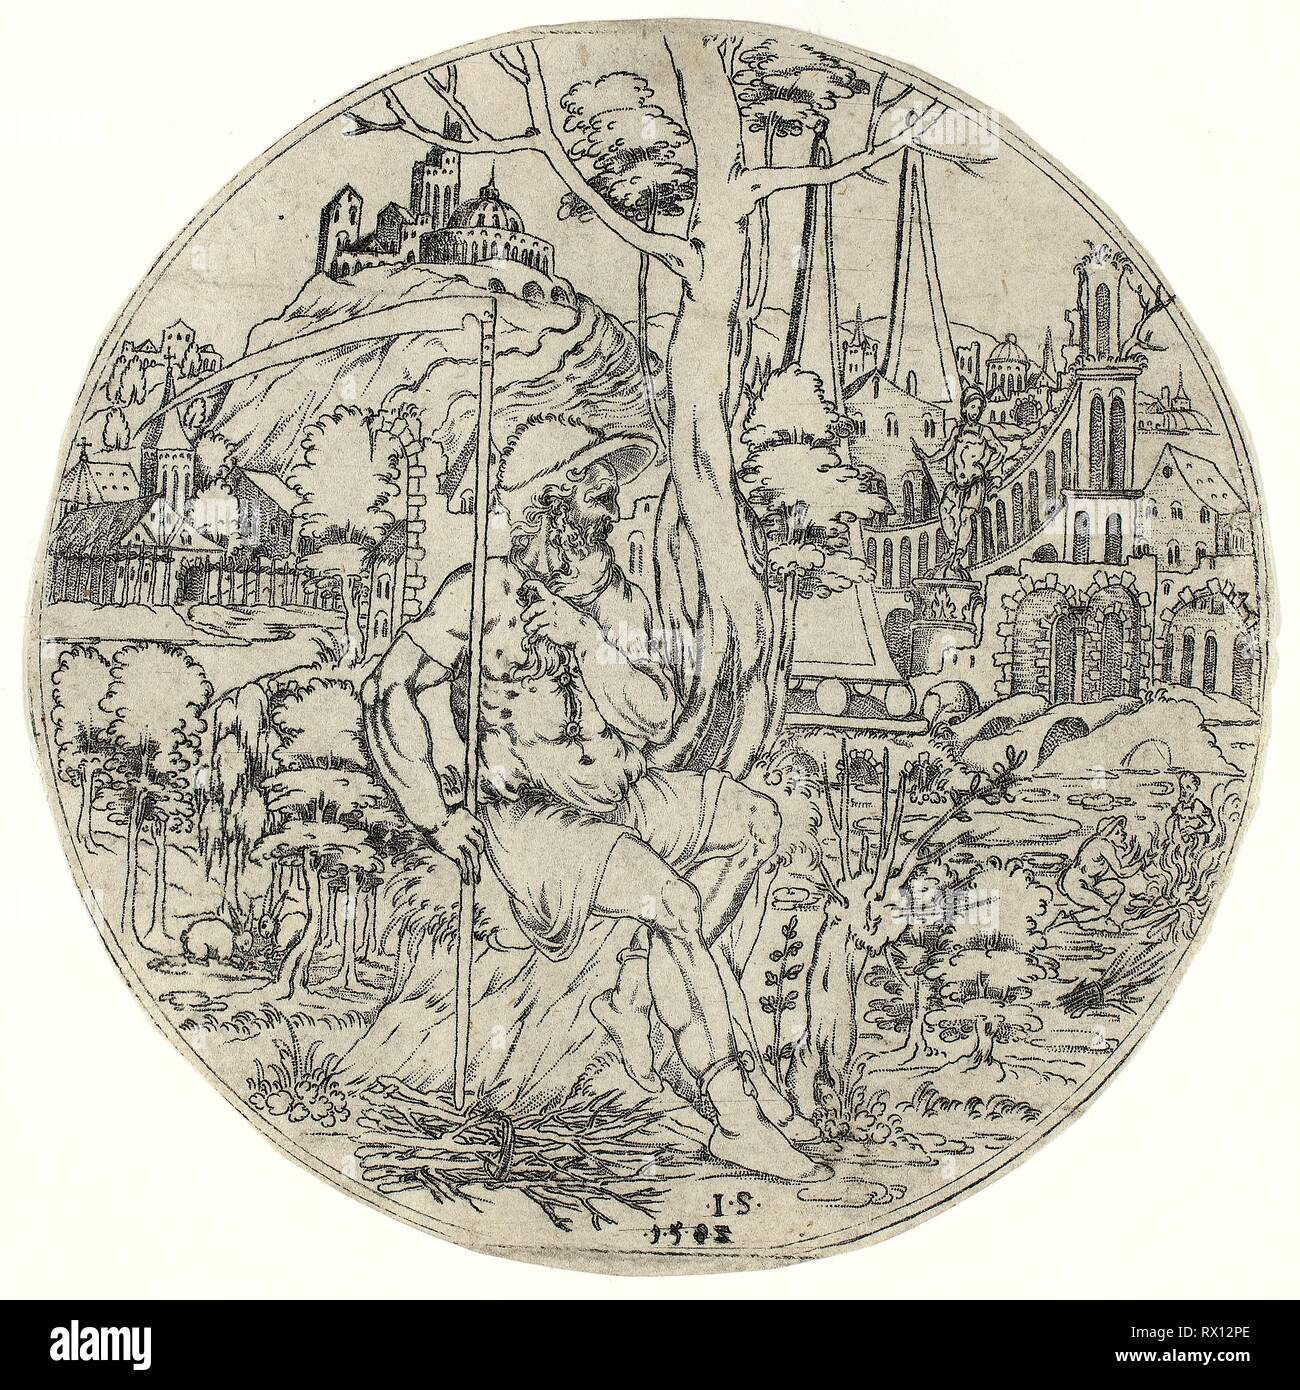 Circular Design with Saturn. Jonas Silber (Master J.S.); German, active 1572-1590. Date: 1583. Dimensions: 120 x 120 mm. Punched engraving on buff laid paper. Origin: Germany. Museum: The Chicago Art Institute. Stock Photo